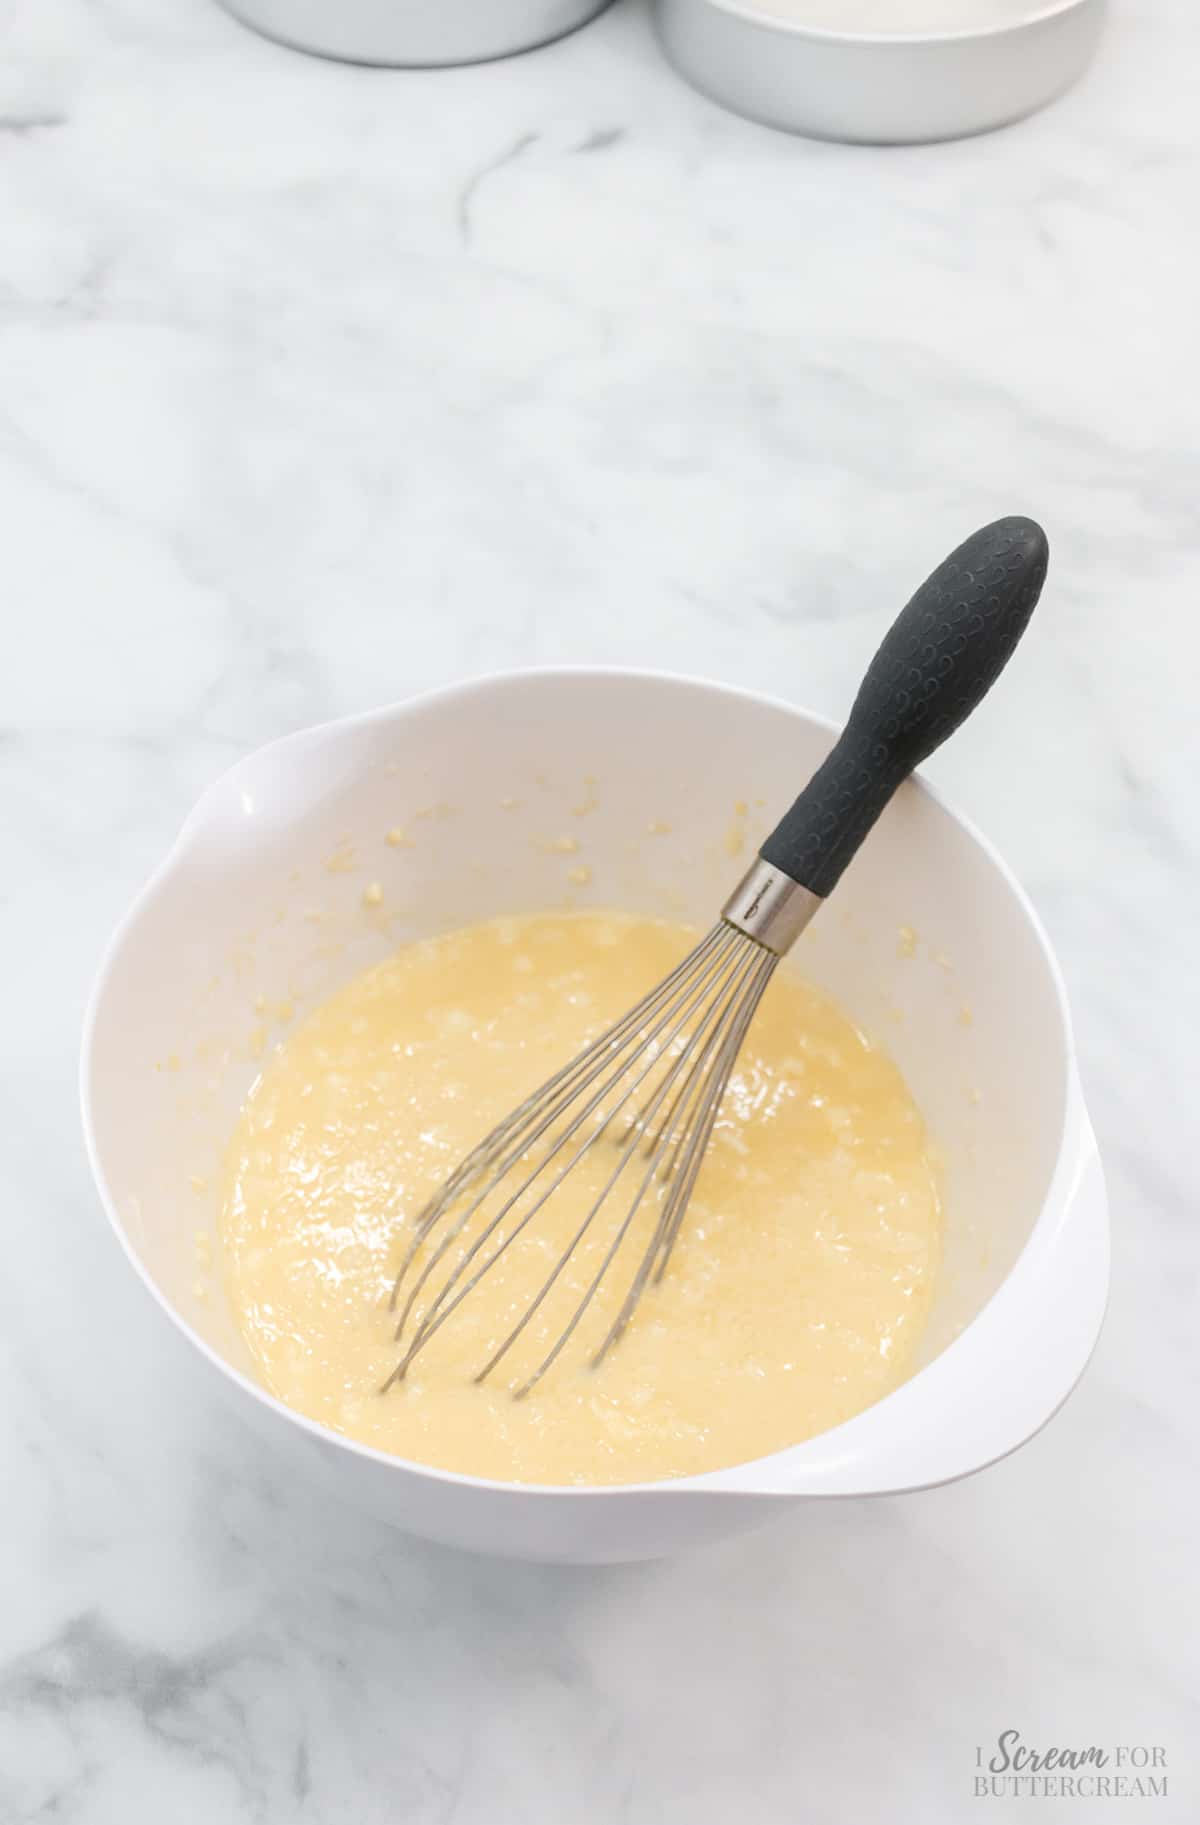 Liquid cake batter in a white bowl with a whisk.